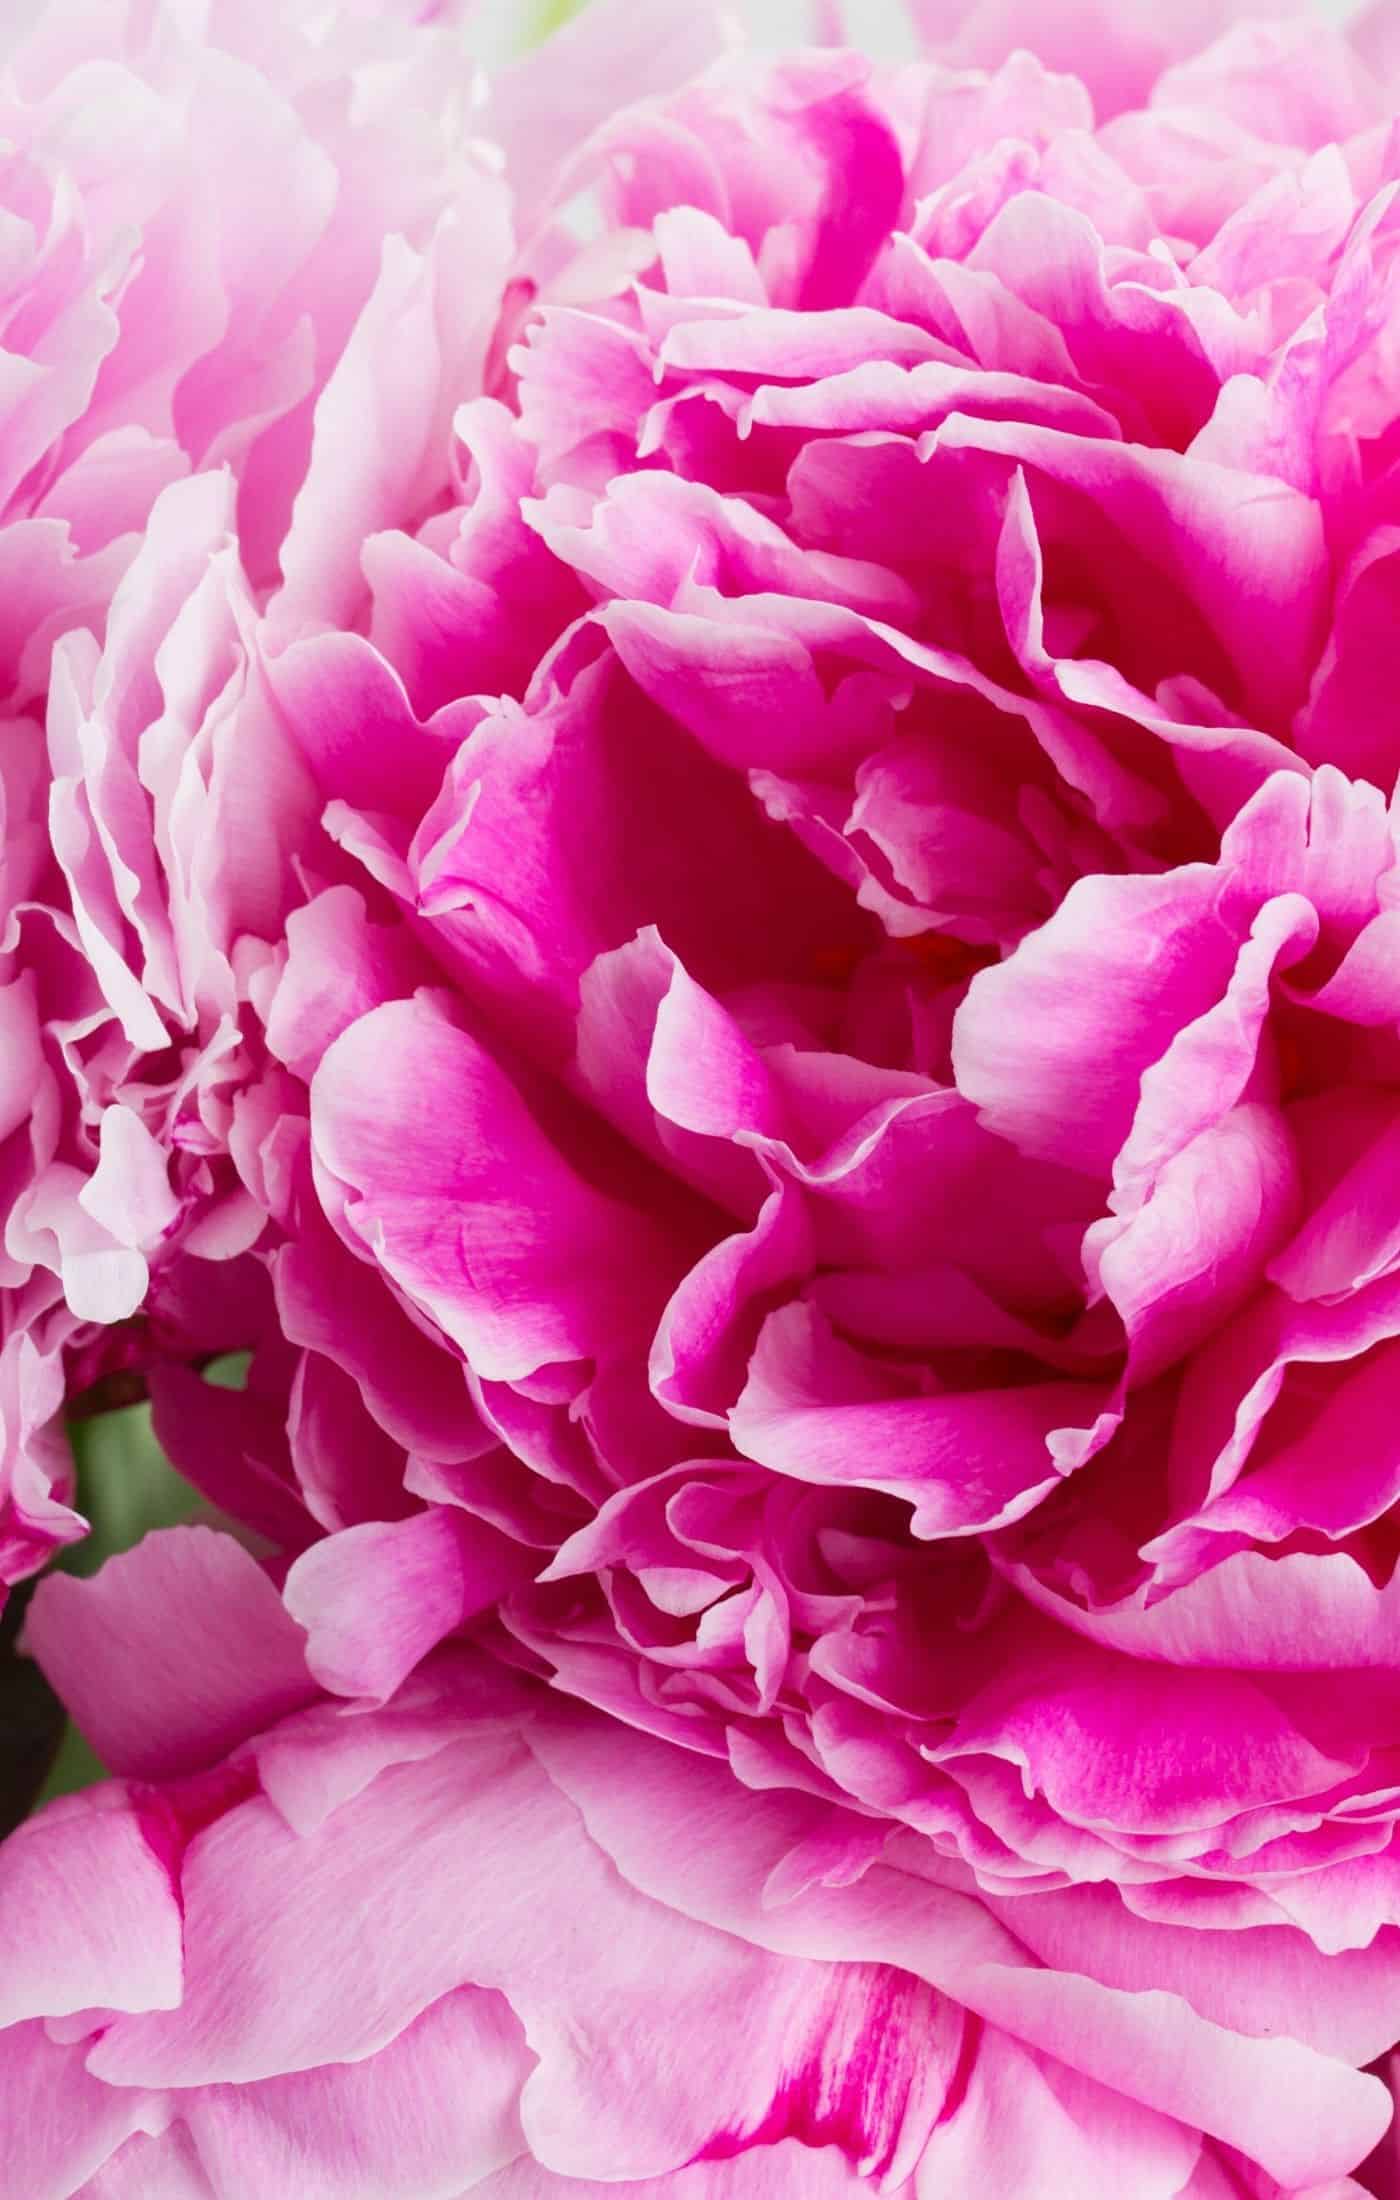 Pink Peonies - The Best Peony Plants with Pink Flowers